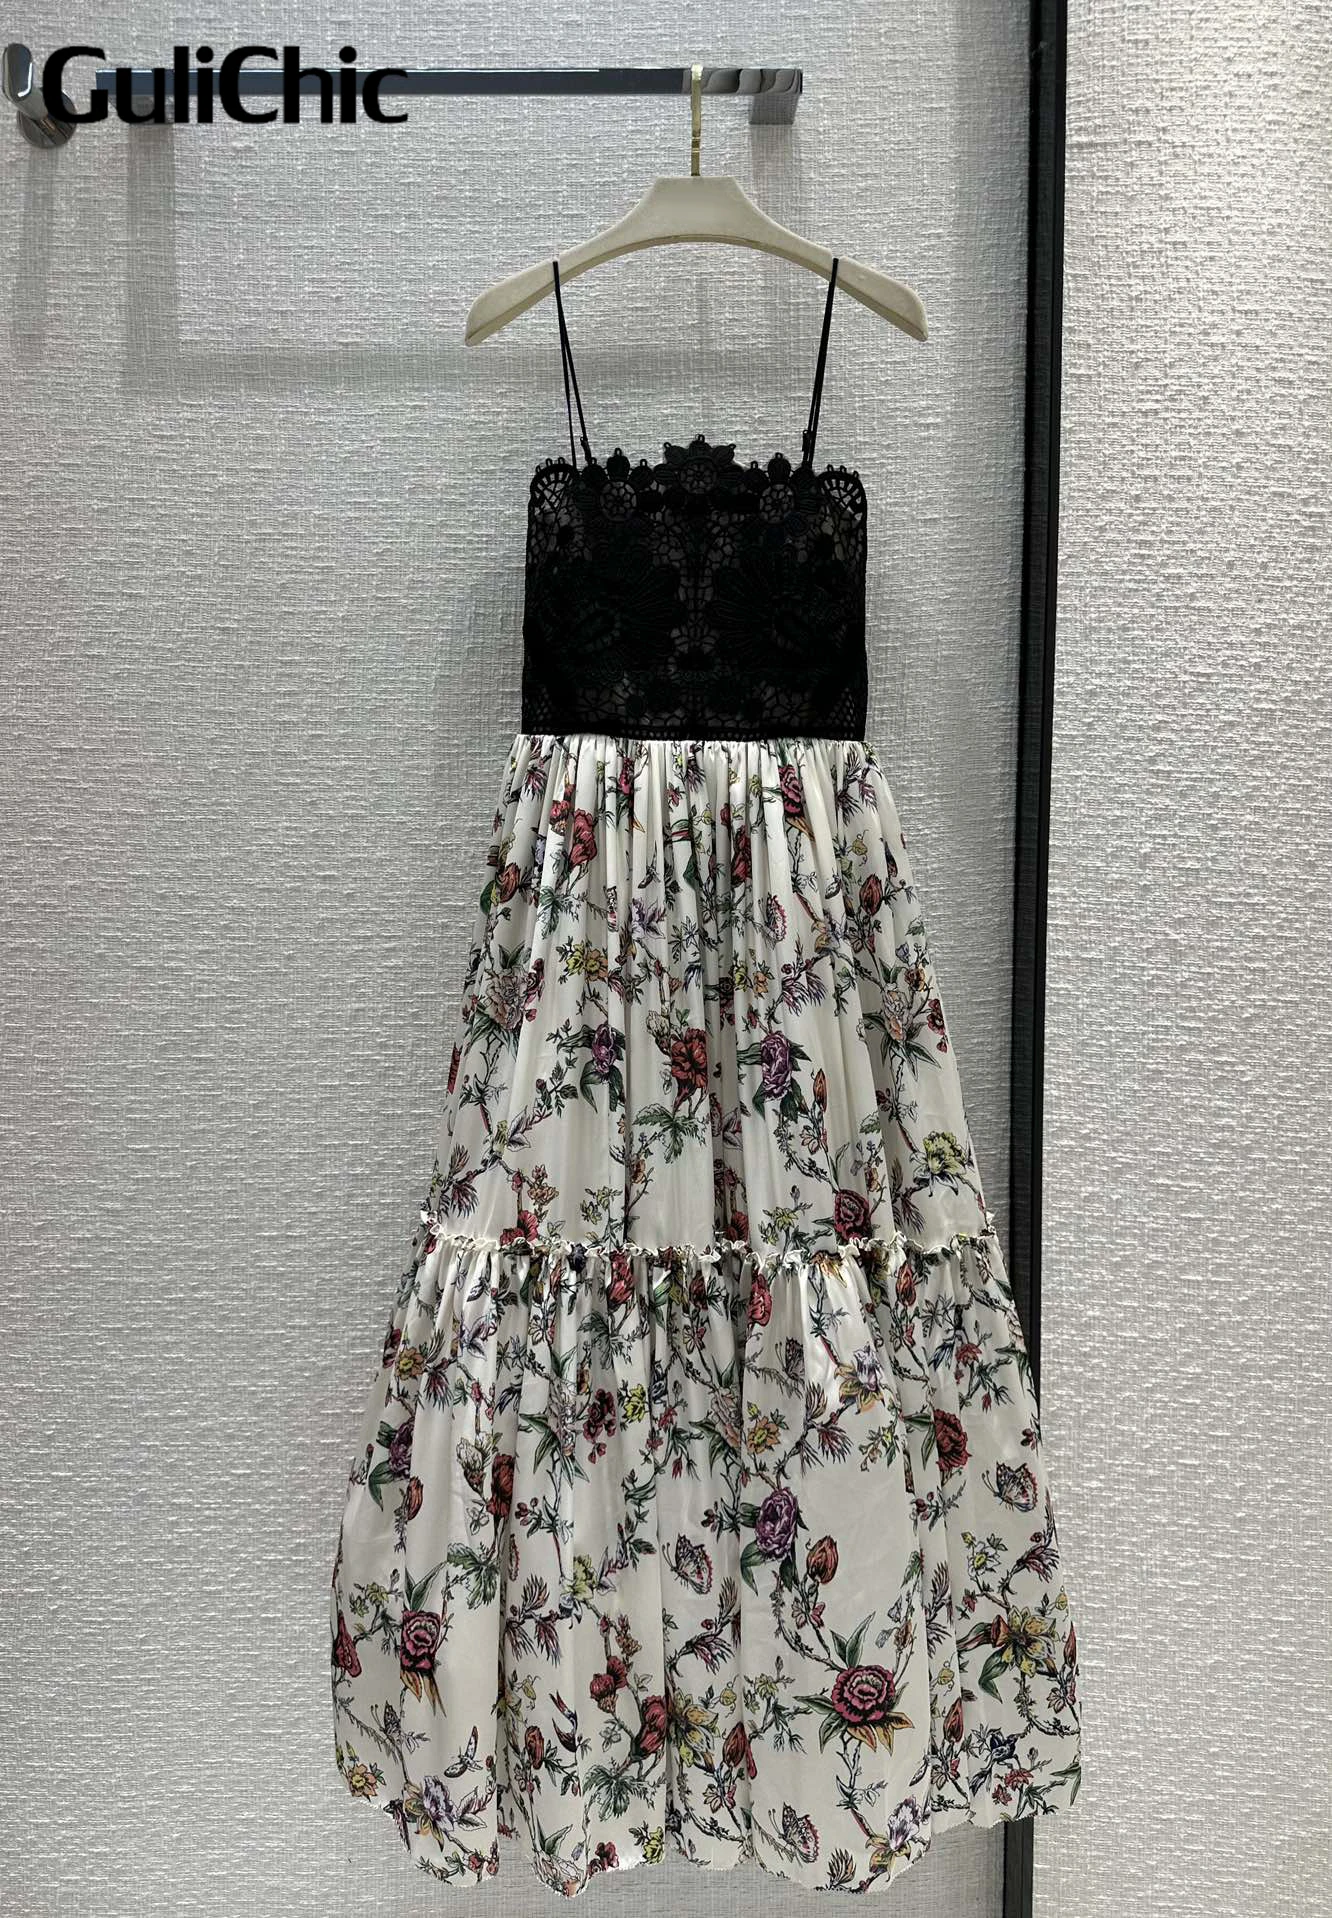 3.29 GuliChic Holiday Elegant Floral Print Hollow Out Embroidery Spaghtti Strap Collect Waist Long Dress Women Without Belt